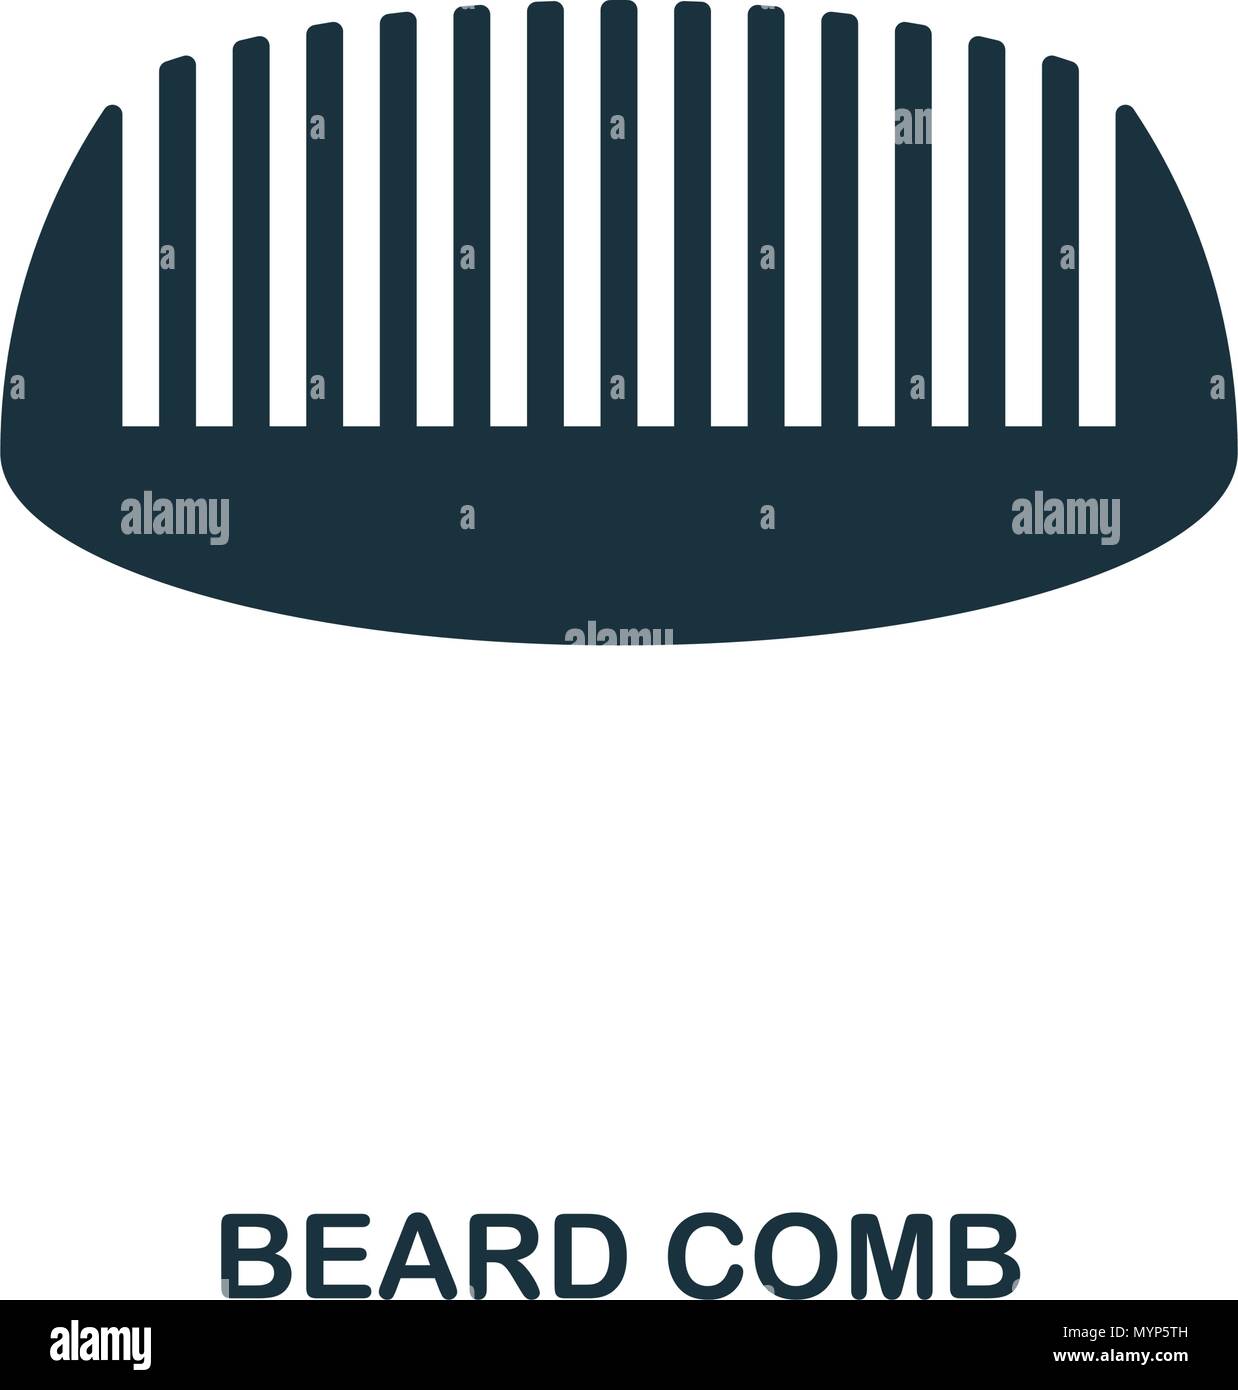 Beard Comb icon. Flat style icon design. UI. Illustration of beard comb icon. Pictogram isolated on white. Ready to use in web design, apps, software, print. Stock Vector